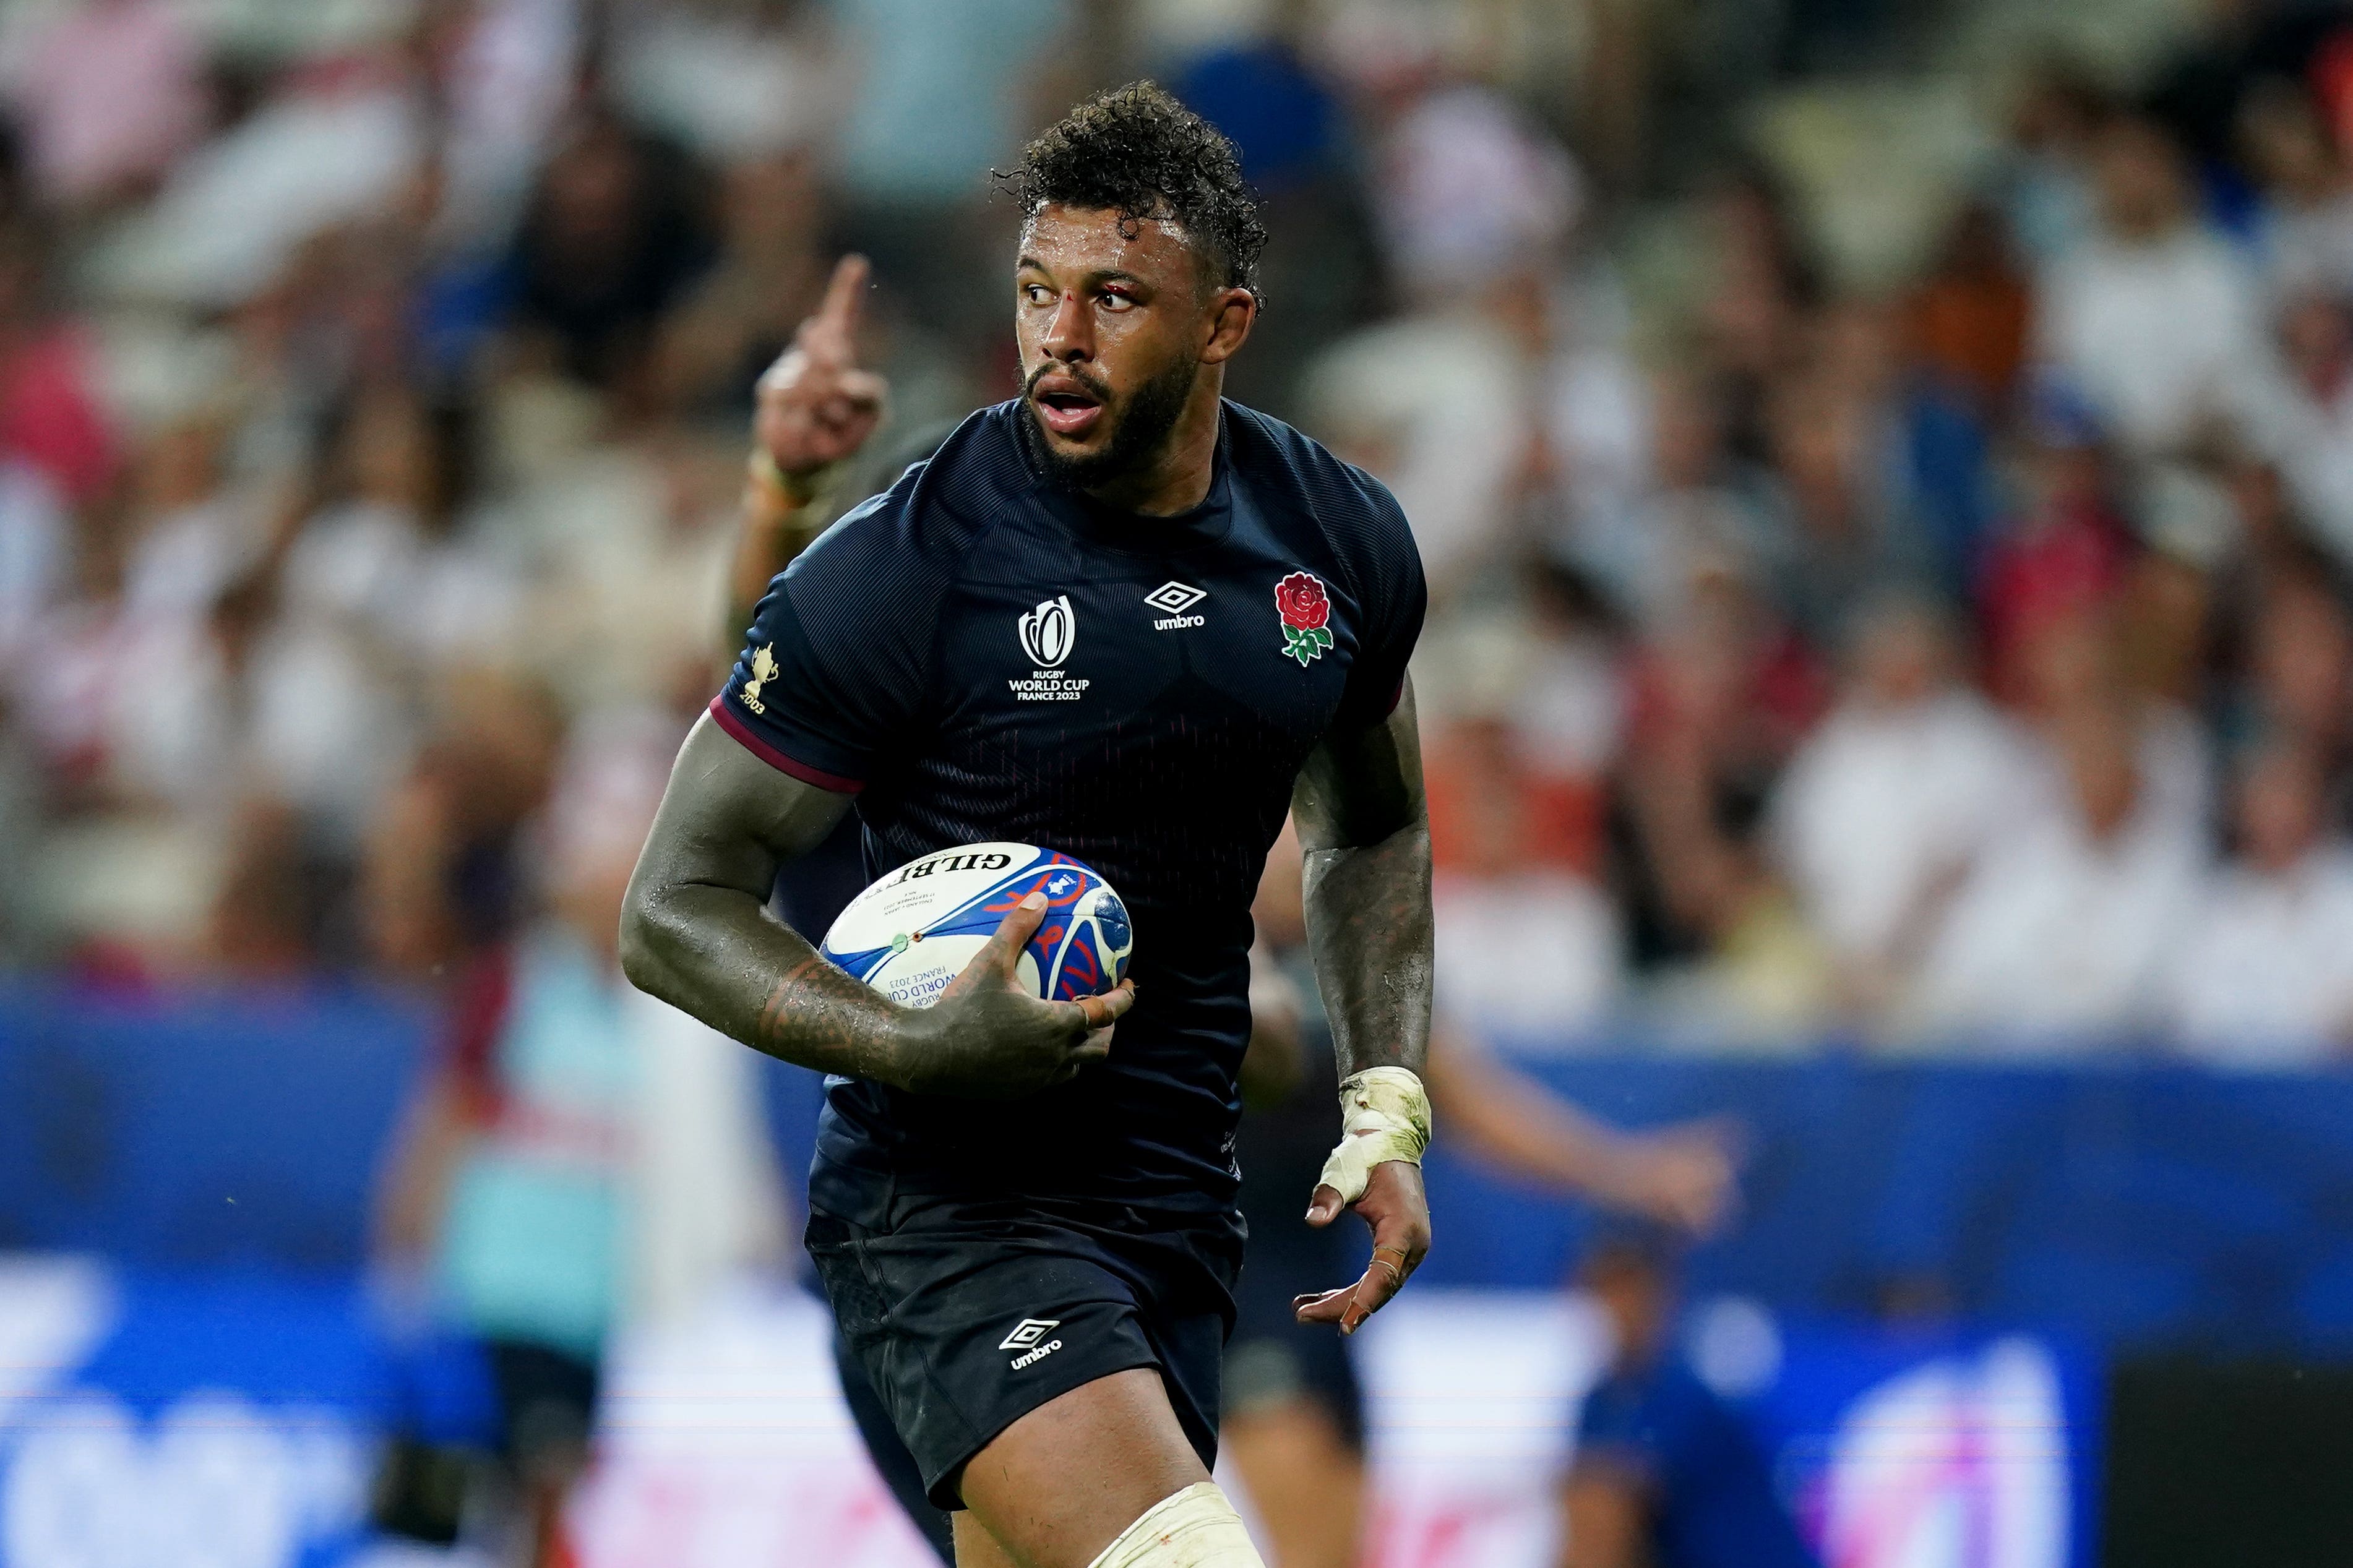 Courtney Lawes scored only his second England try against Japan in Nice